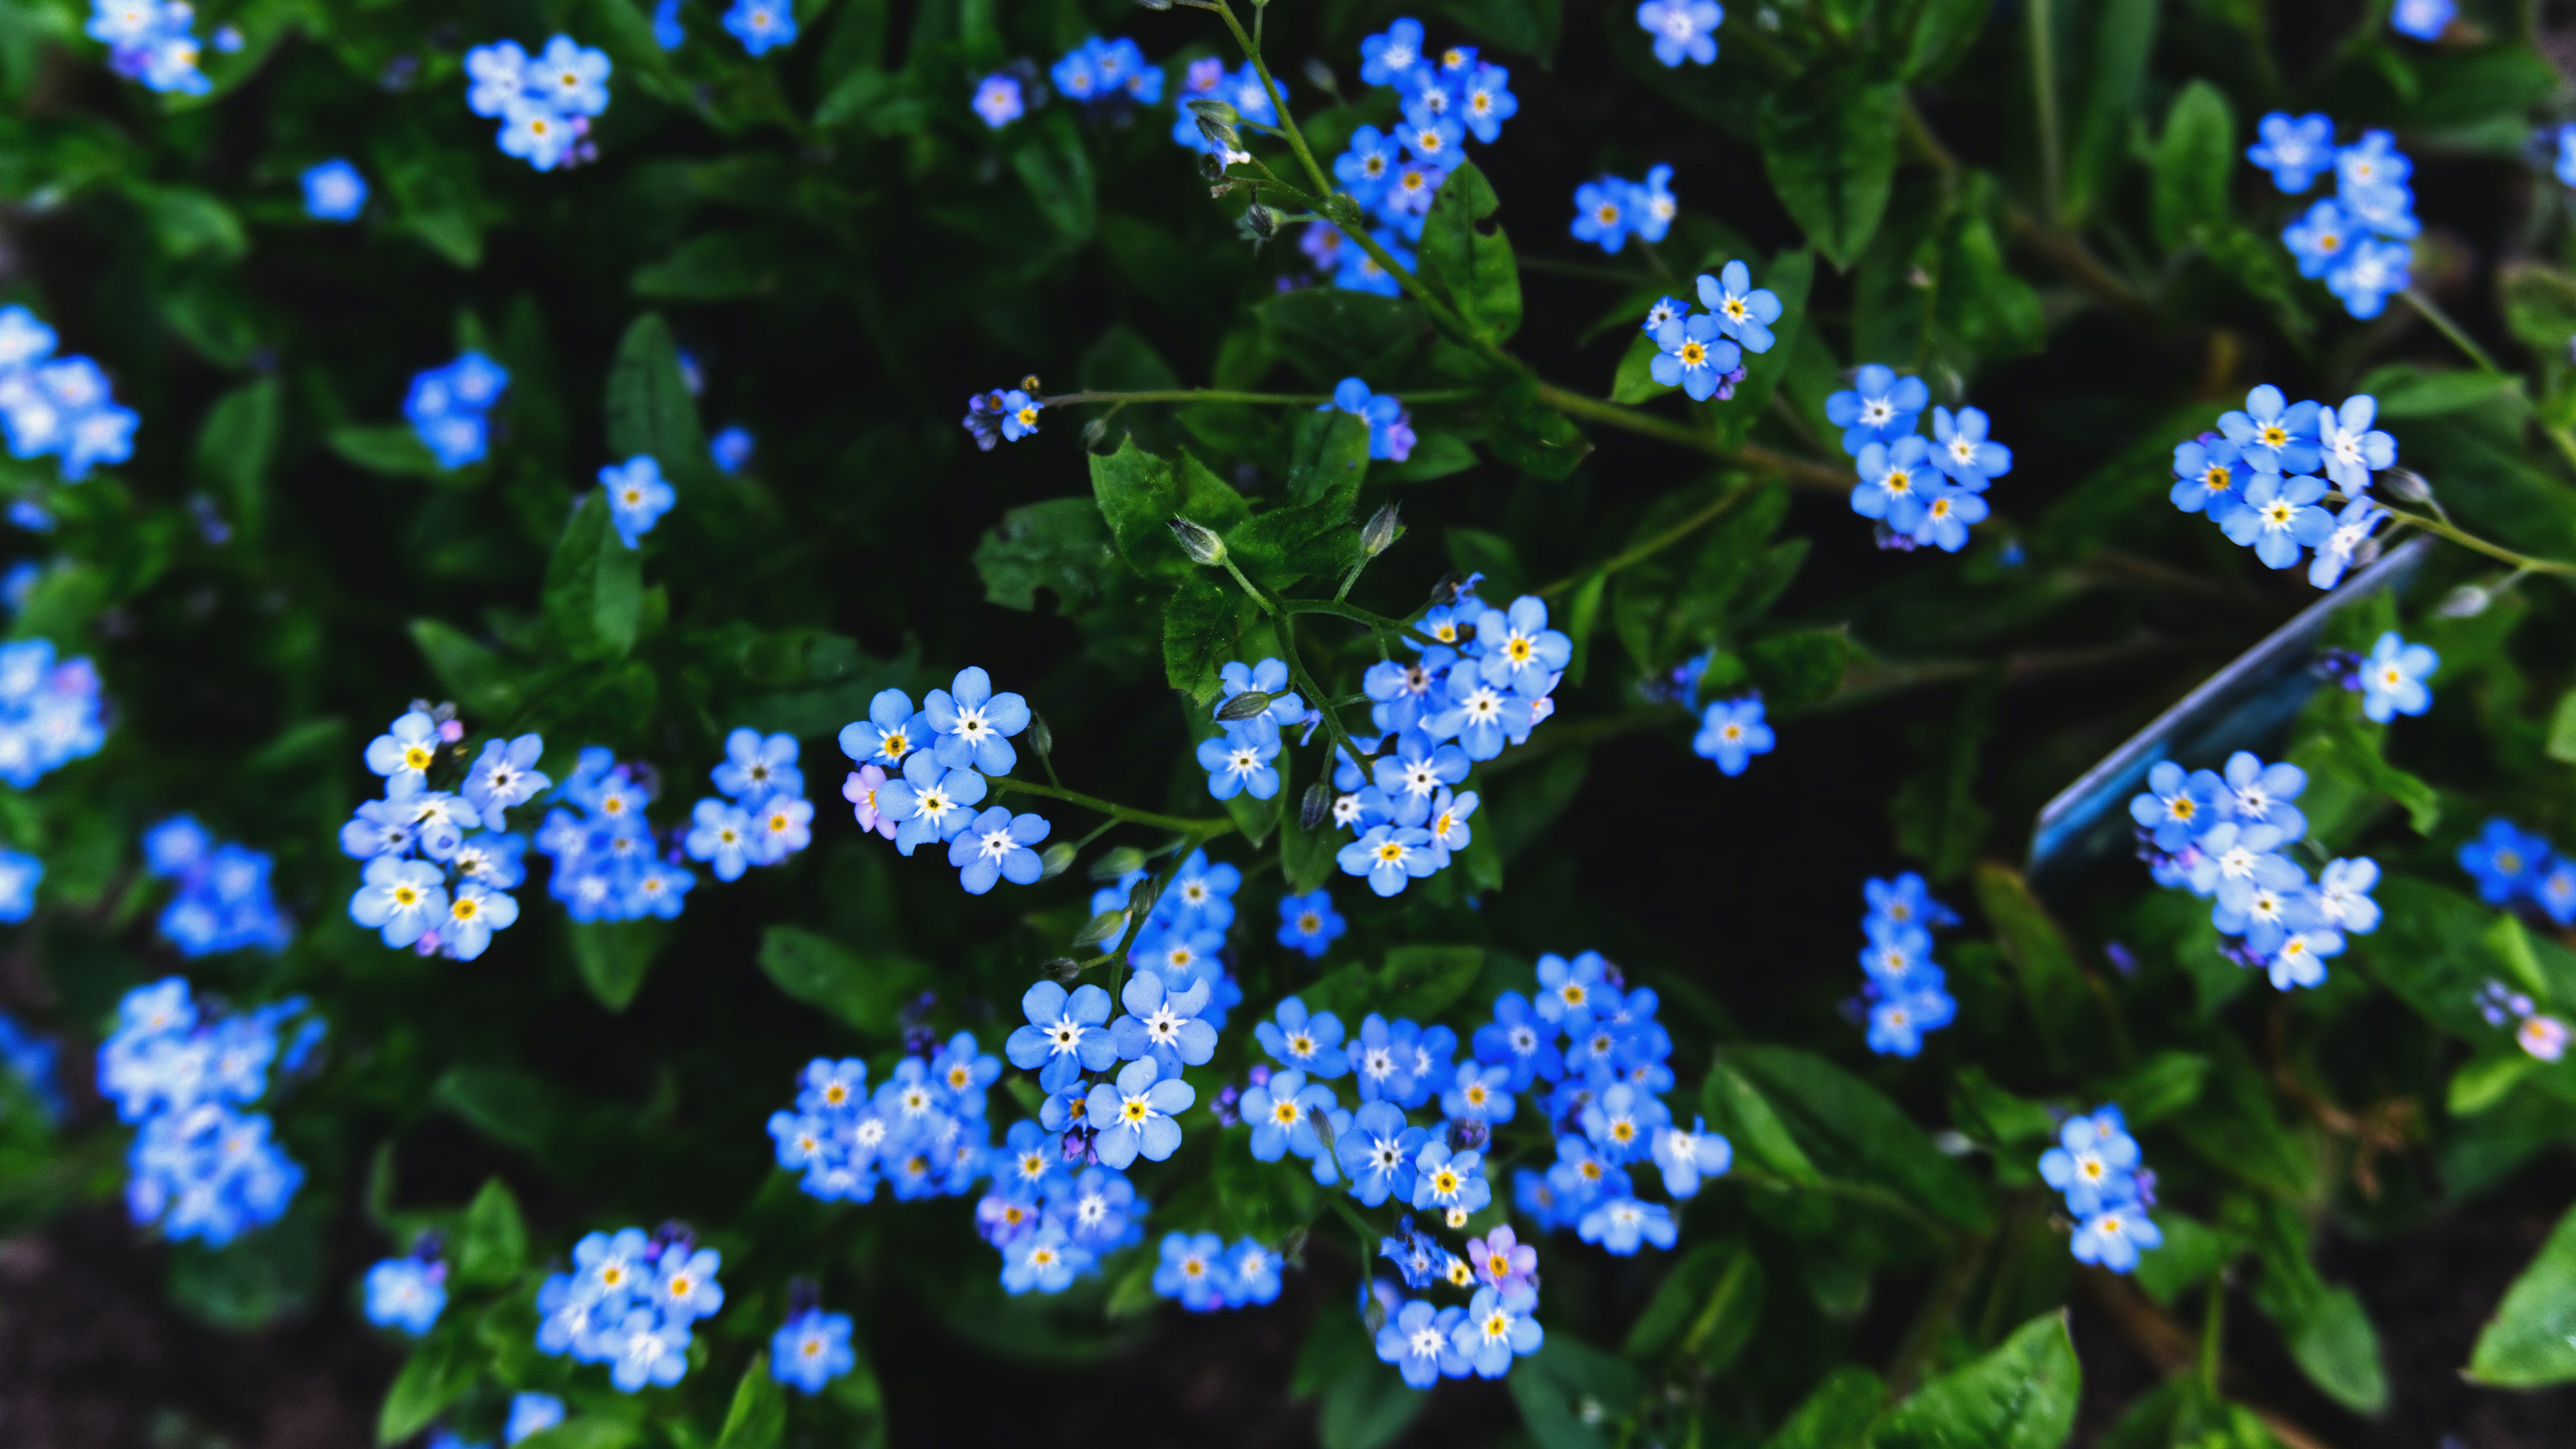 Forget Me Not Flower iPhone Wallpapers Free Download